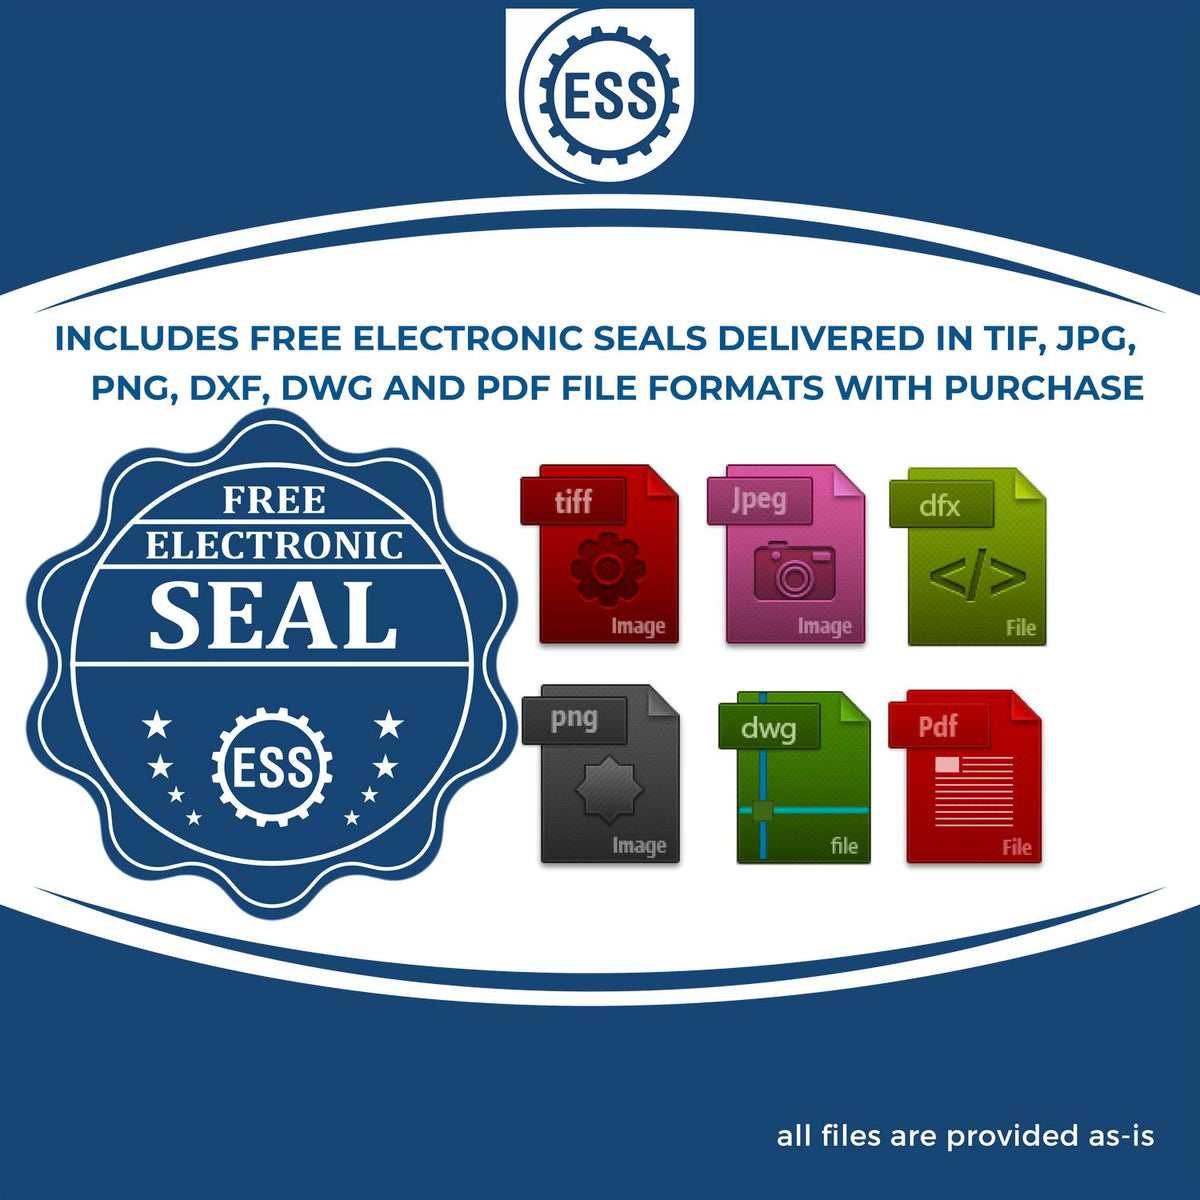 An infographic for the free electronic seal for the State of Washington Extended Long Reach Engineer Seal illustrating the different file type icons such as DXF, DWG, TIF, JPG and PNG.